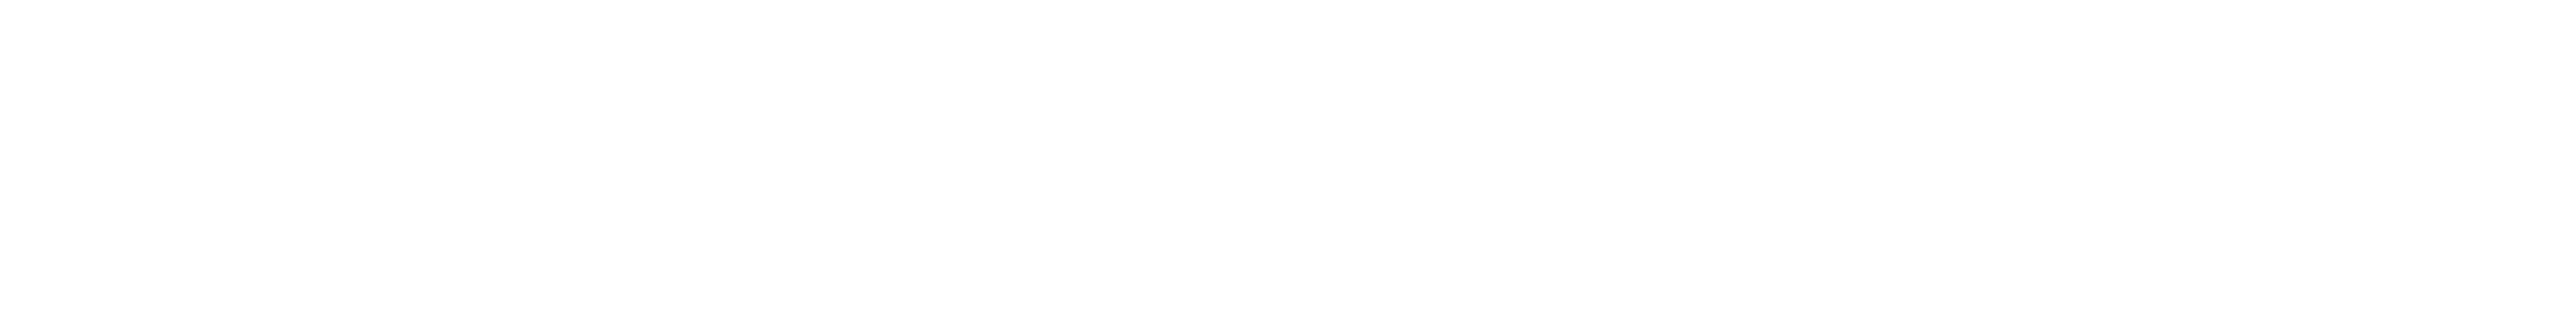 Institute for Research on Learning and Instruction